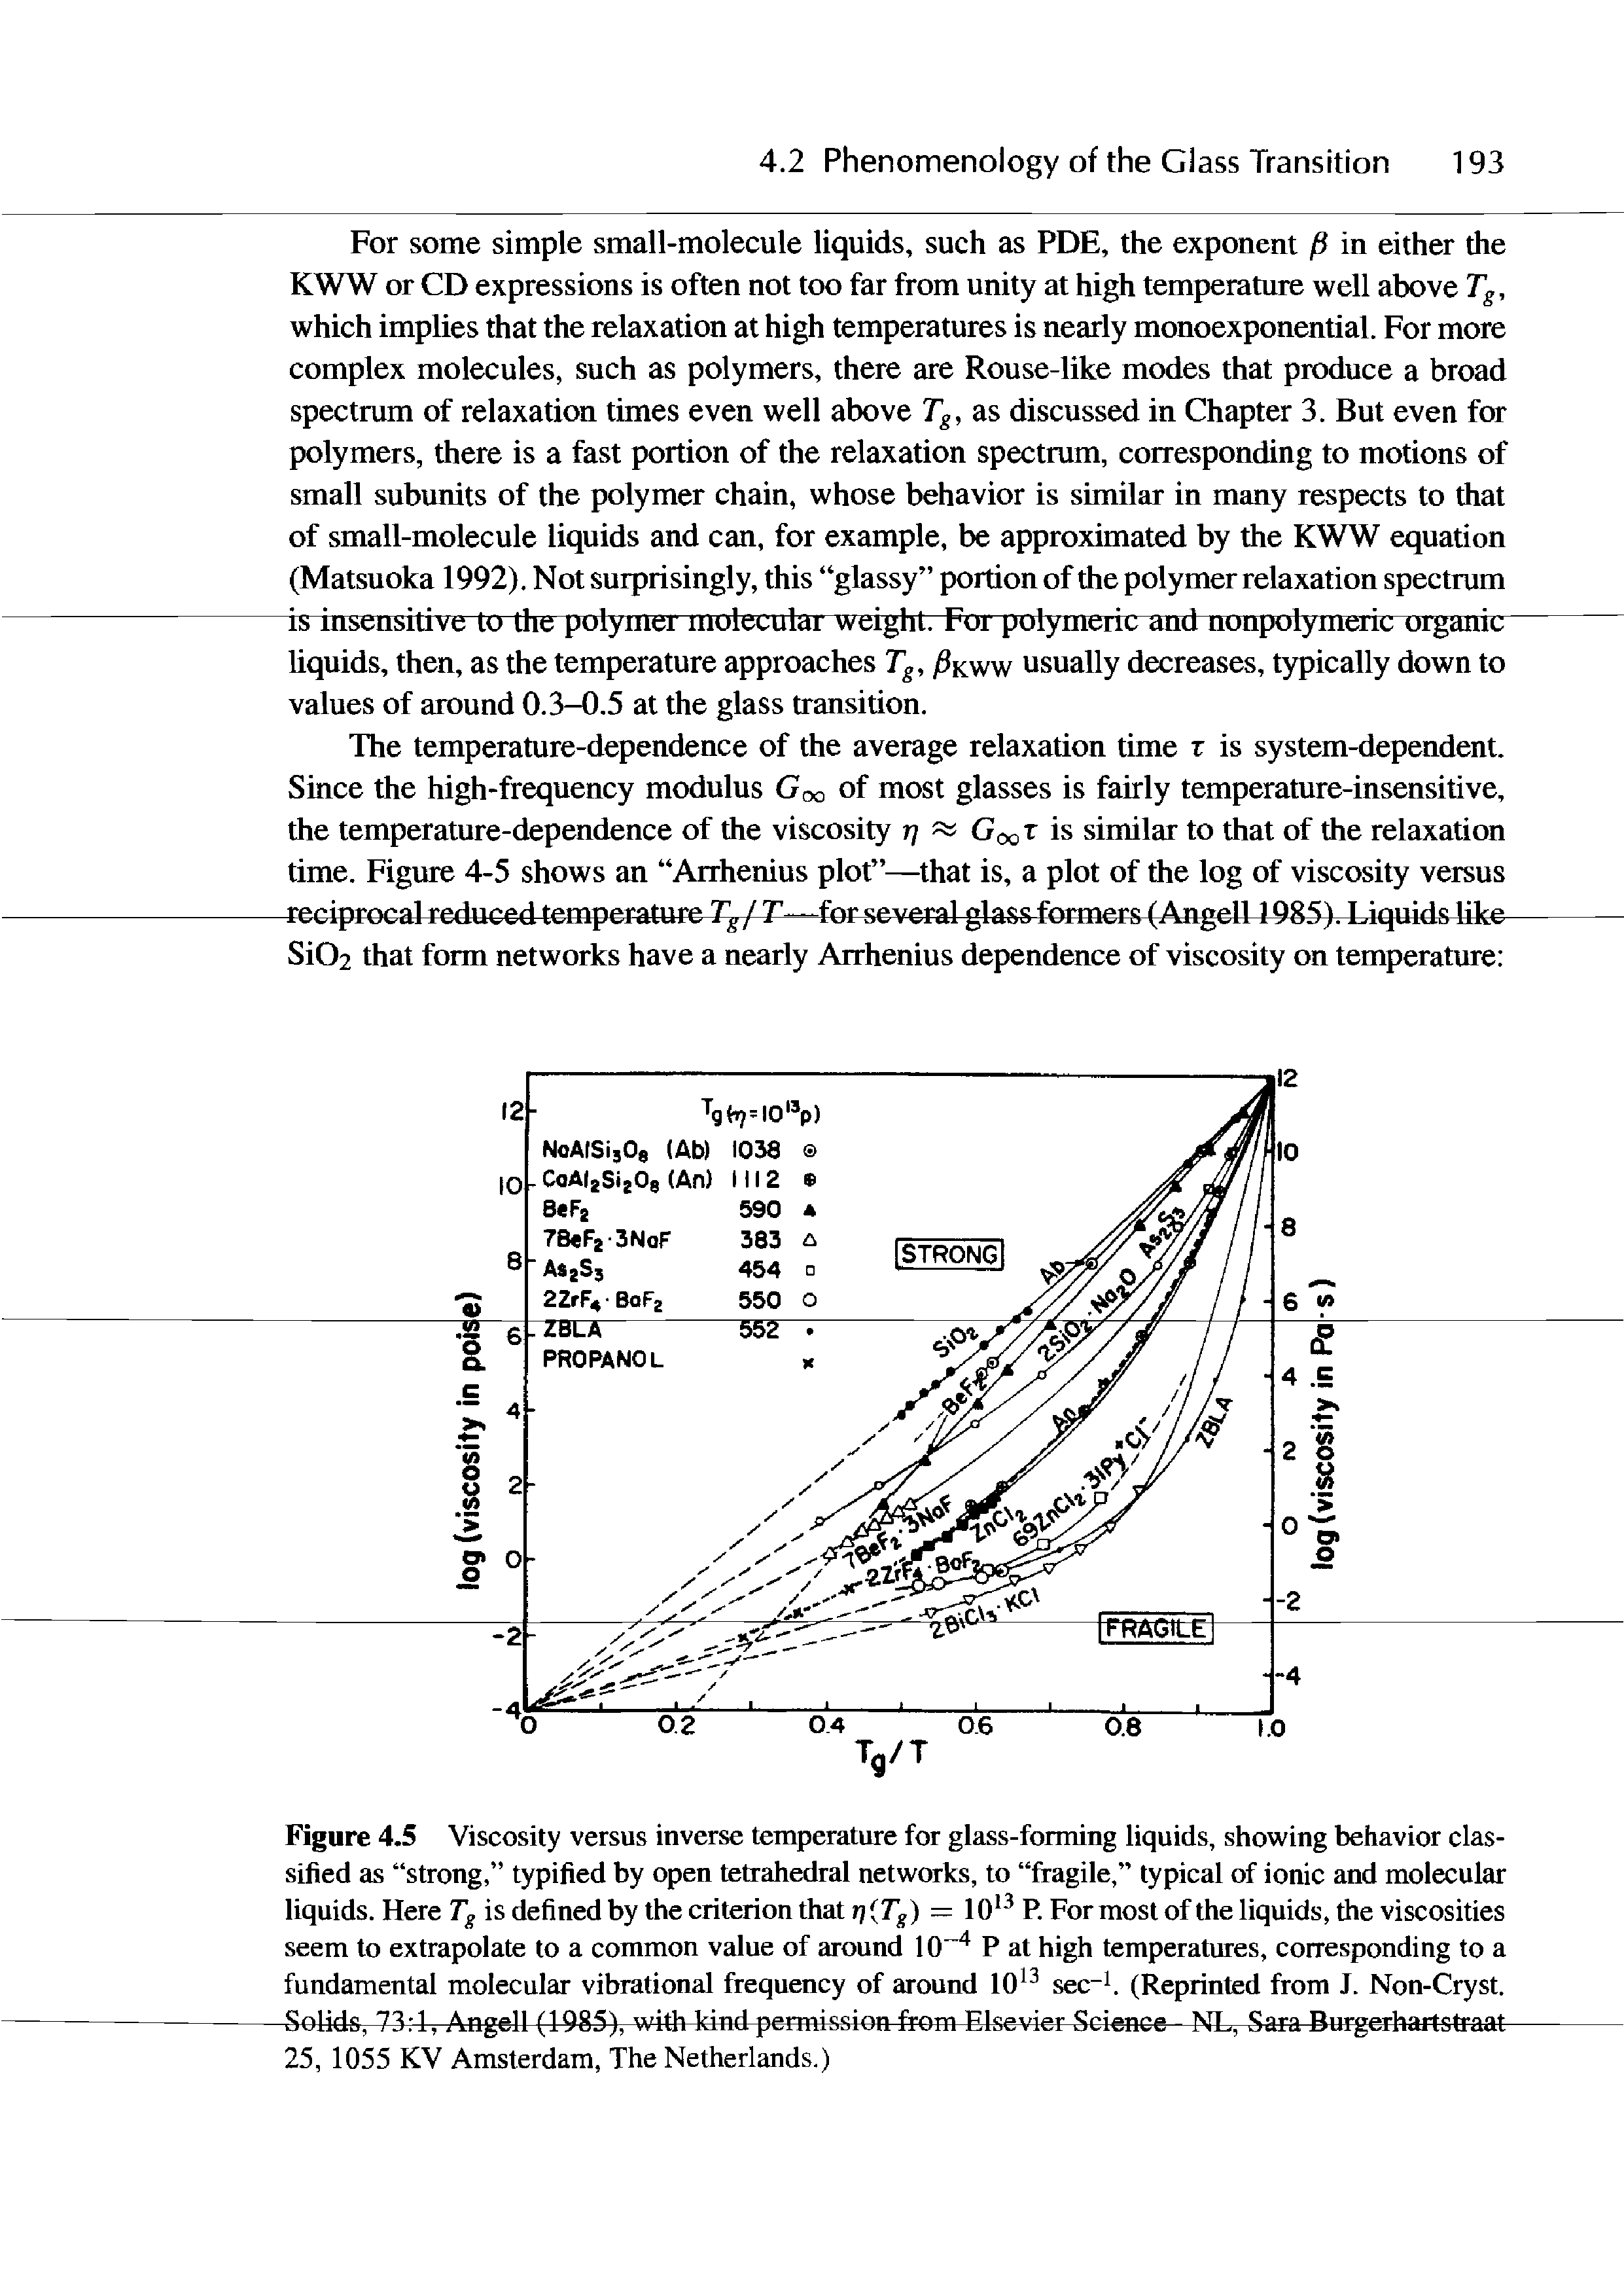 Figure 4.5 Viscosity versus inverse temperature for glass-forming liquids, showing behavior classified as strong, typified by open tetrahedral networks, to fragile, typical of ionic and molecular liquids. Here Tg is defined by the criterion that nlT ) = 10 P. For most of the liquids, the viscosities seem to extrapolate to a common value of around 10" P at high temperatures, corresponding to a fundamental molecular vibrational frequency of around 10 sec-i. (Reprinted from J. Non-Cryst. -Solids, 73 1, Angell (1985), with kind permission from Elsevier Science—NL, Sara Burgerhartstraat 25, 1055 KV Amsterdam, The Netherlands.)...